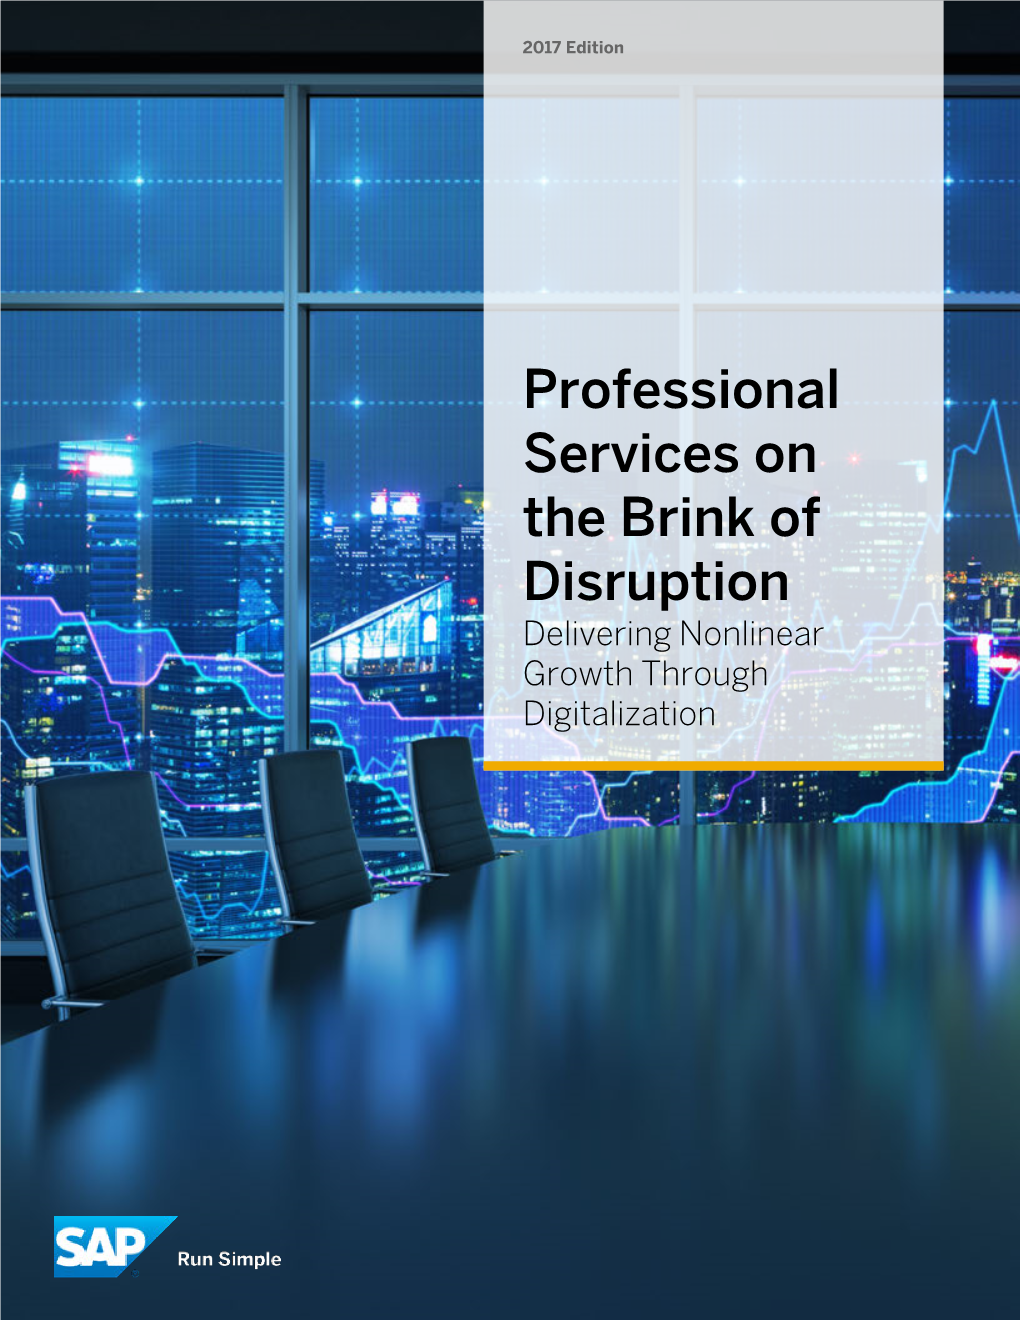 Professional Services on the Brink of Disruption Delivering Nonlinear Growth Through Digitalization